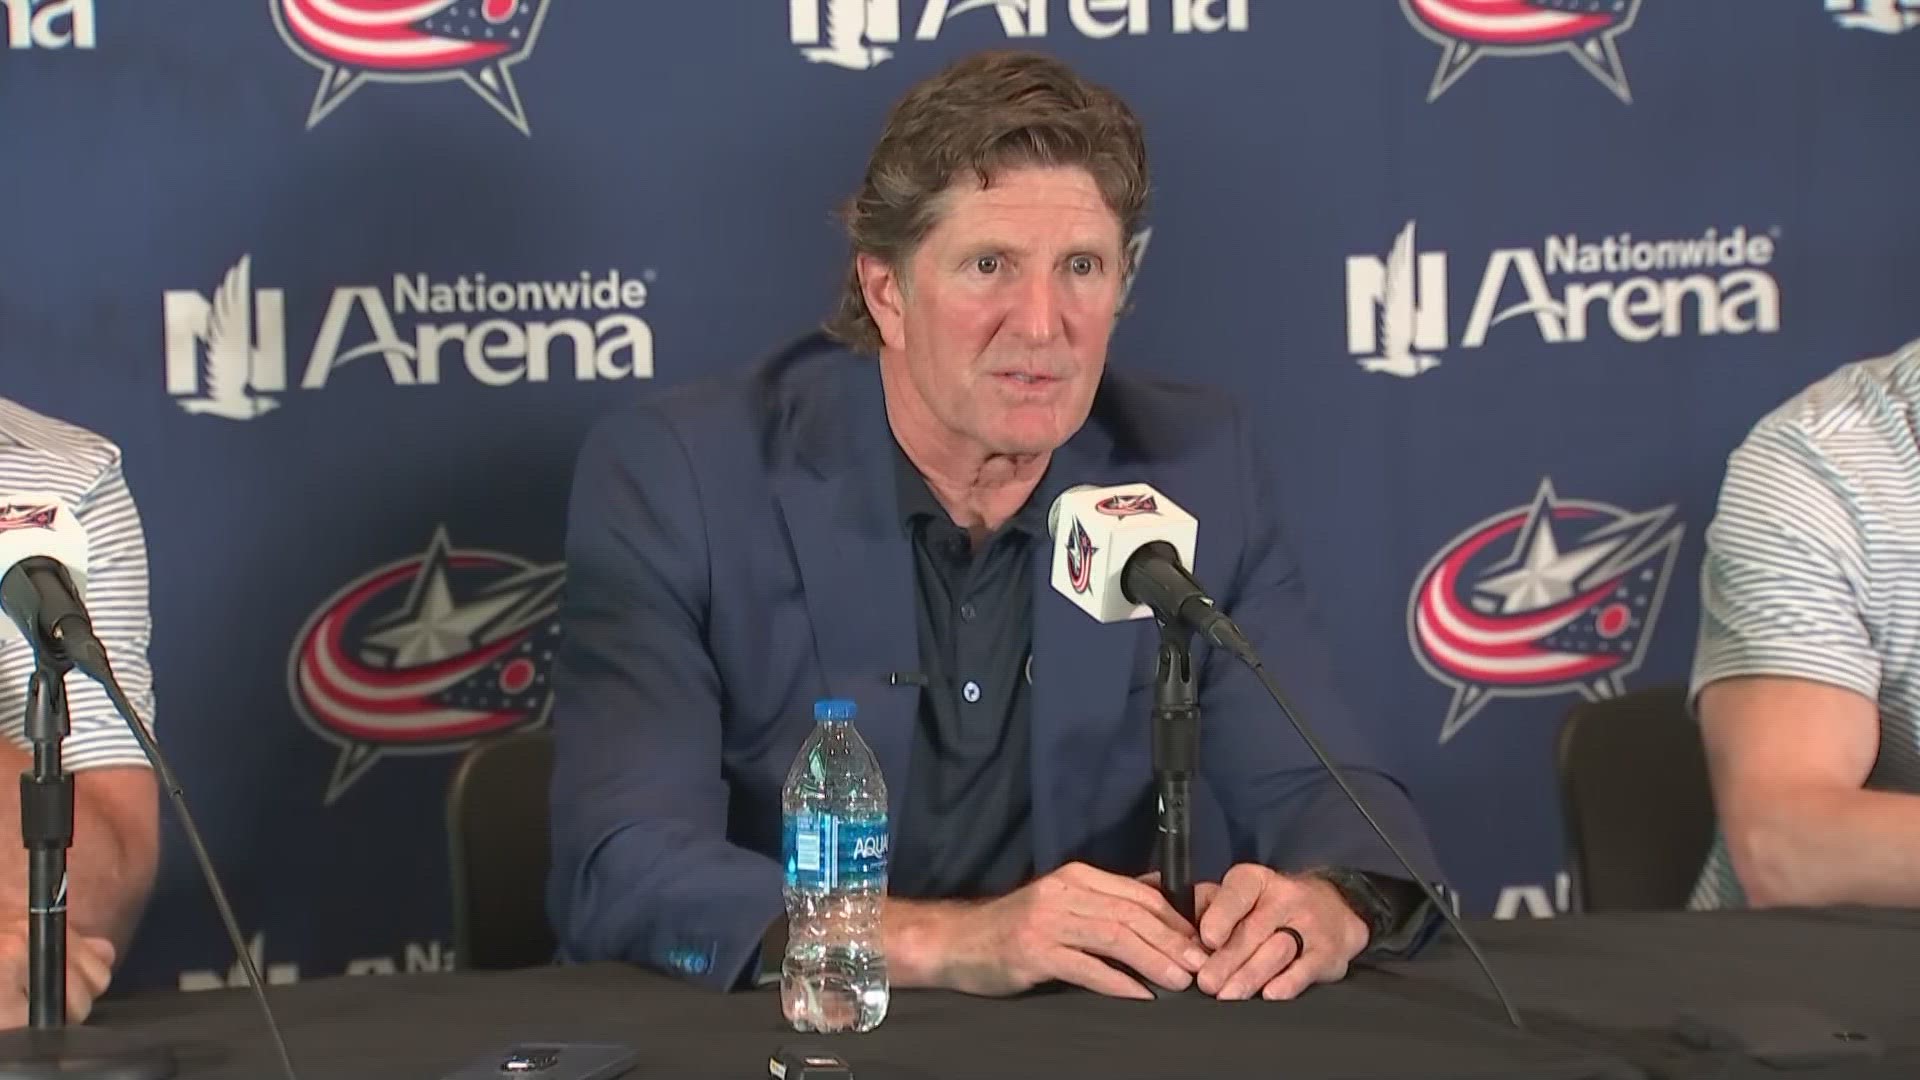 Mike Babcock, 60, signed a two-year contract through the 2024-25 National Hockey League season.